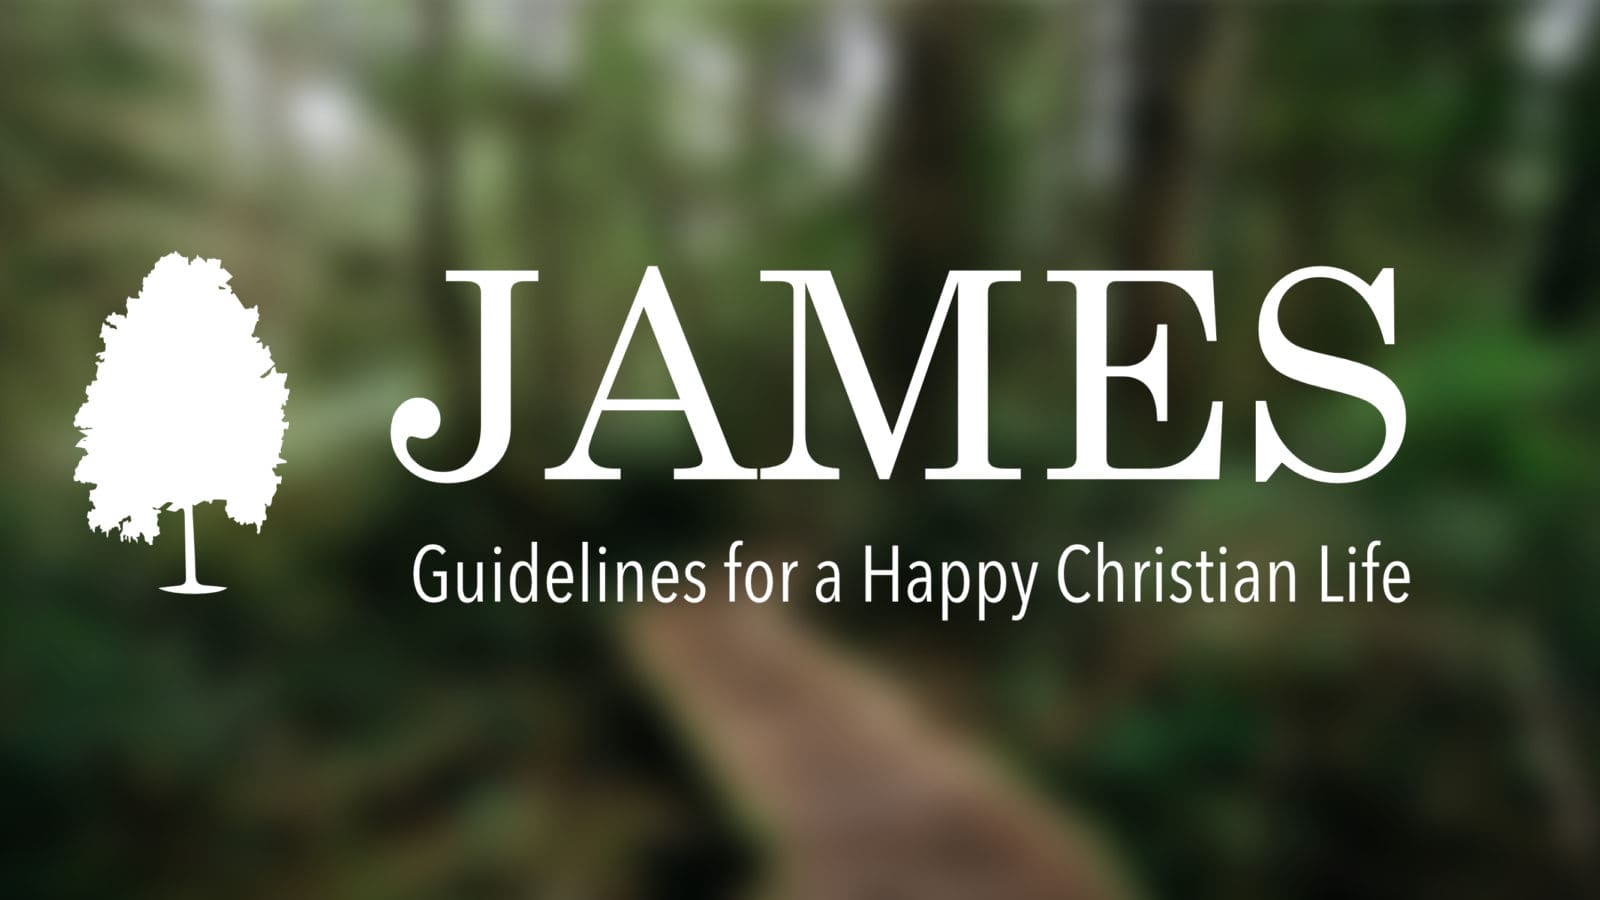 Introduction to James